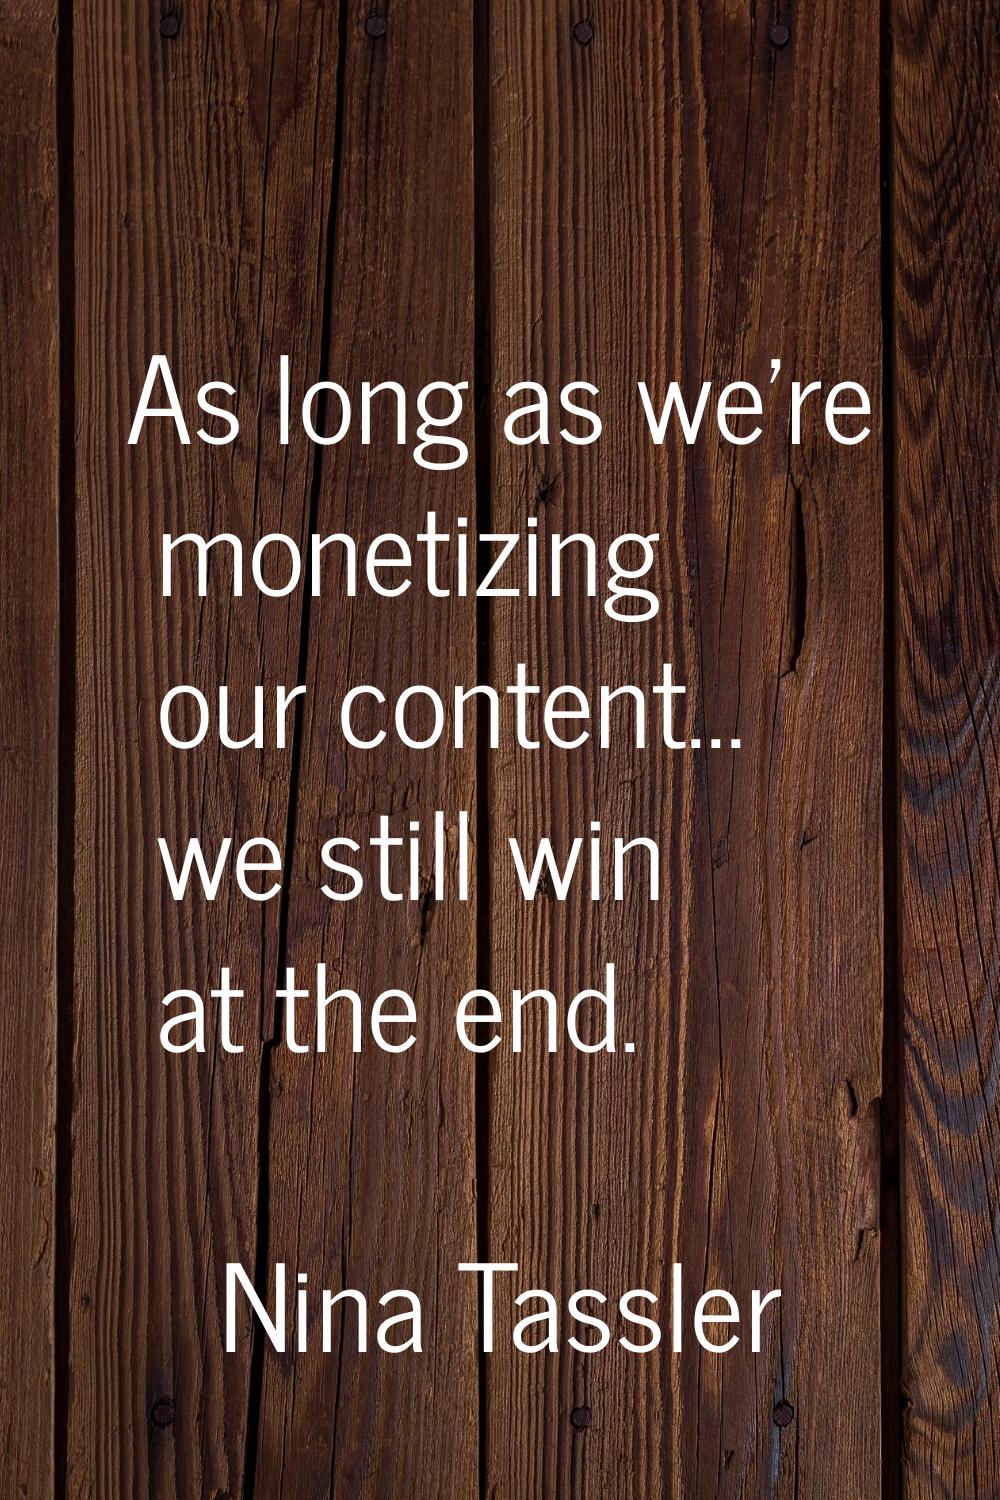 As long as we're monetizing our content... we still win at the end.